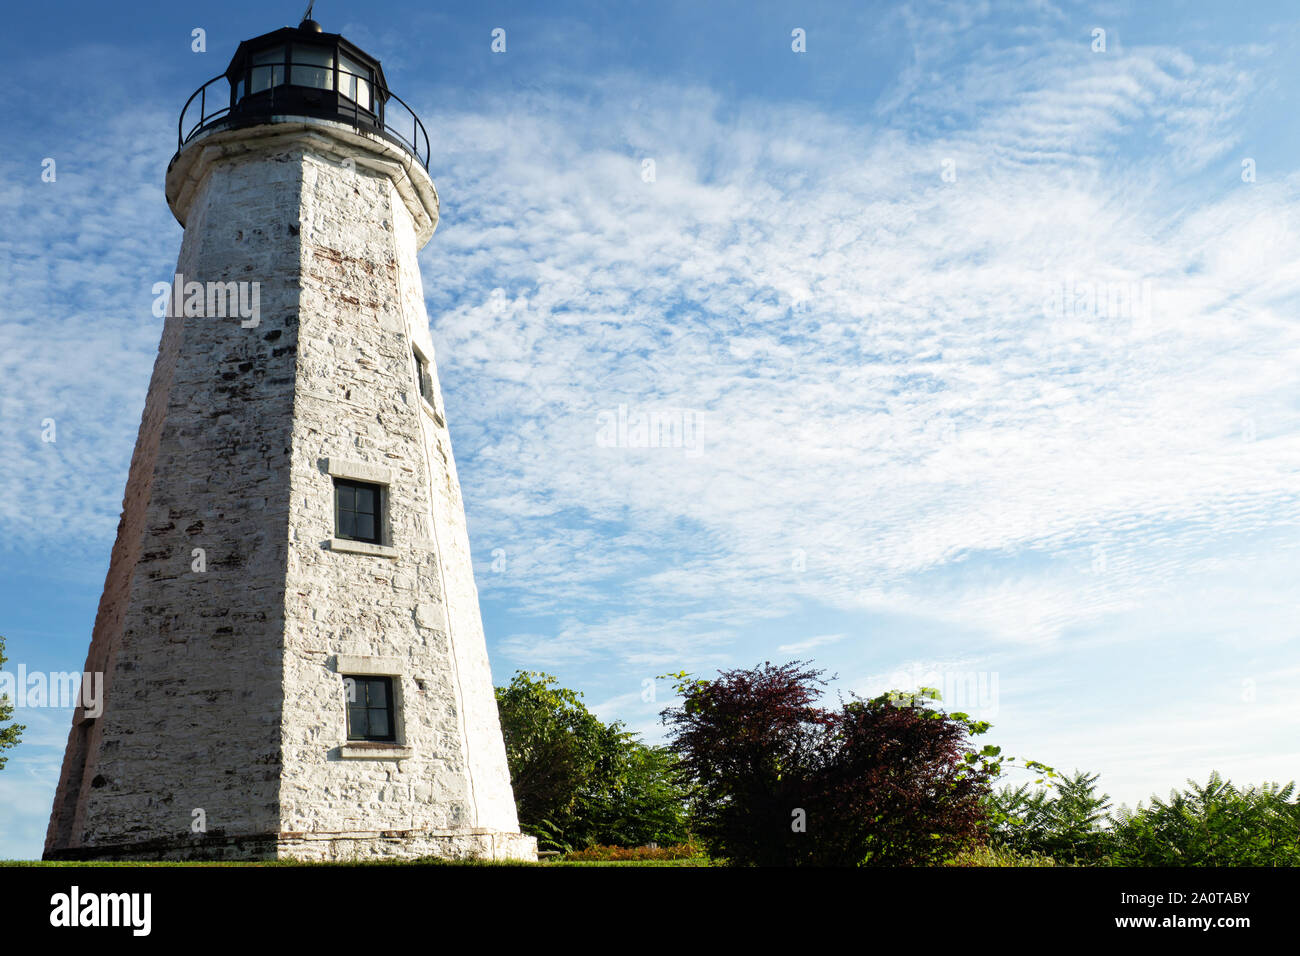 Rochester, New York, USA. September 20, 2019. View of the Charlotte-Genesee Lighthouse, built in 1822, in Charlotte, a suburb of Rochester, near the s Stock Photo